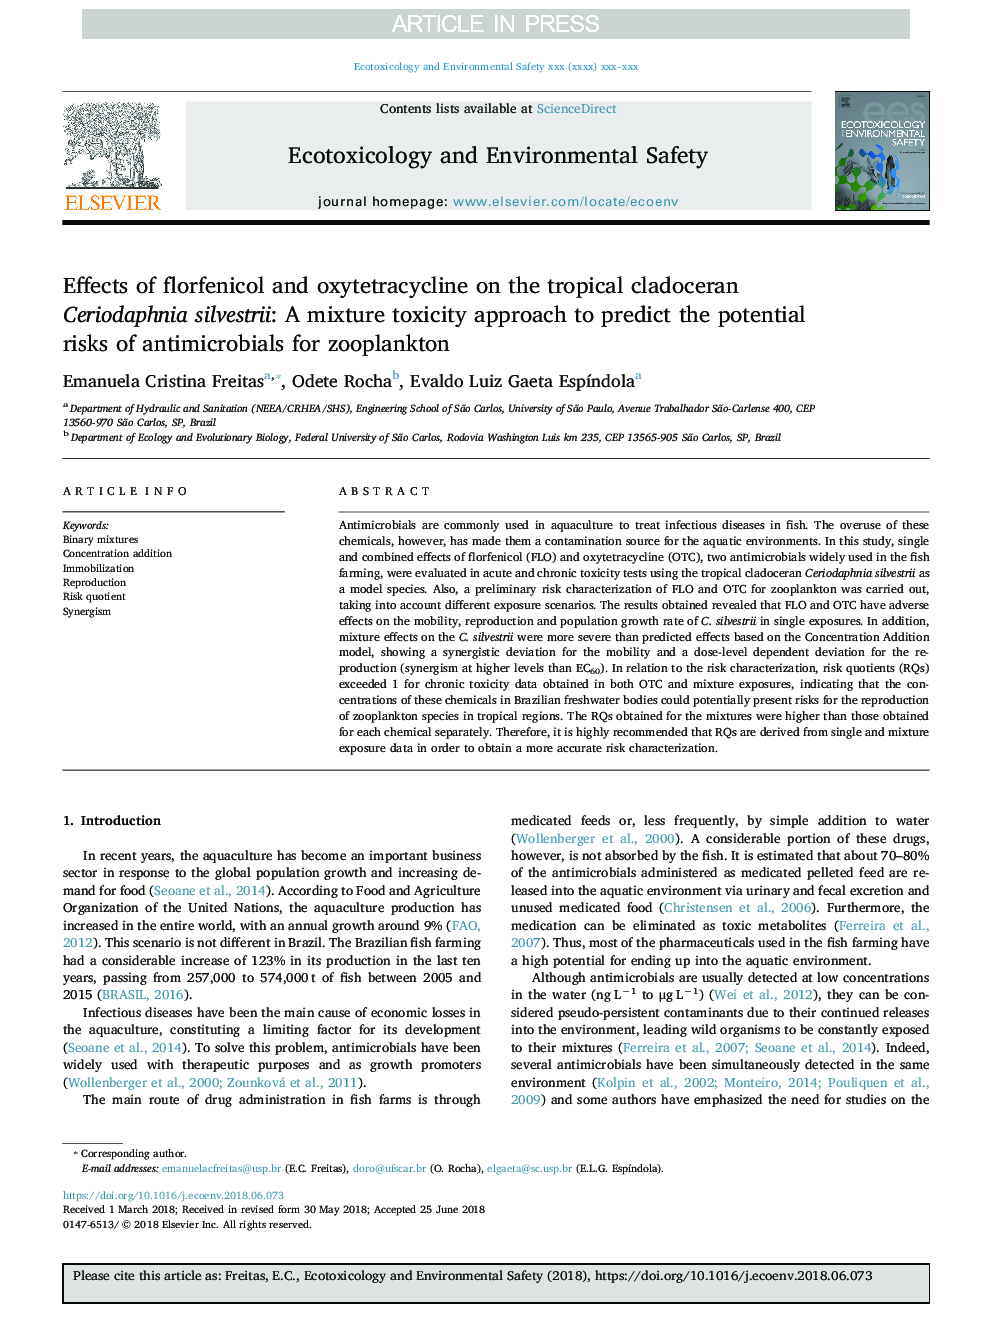 Effects of florfenicol and oxytetracycline on the tropical cladoceran Ceriodaphnia silvestrii: A mixture toxicity approach to predict the potential risks of antimicrobials for zooplankton